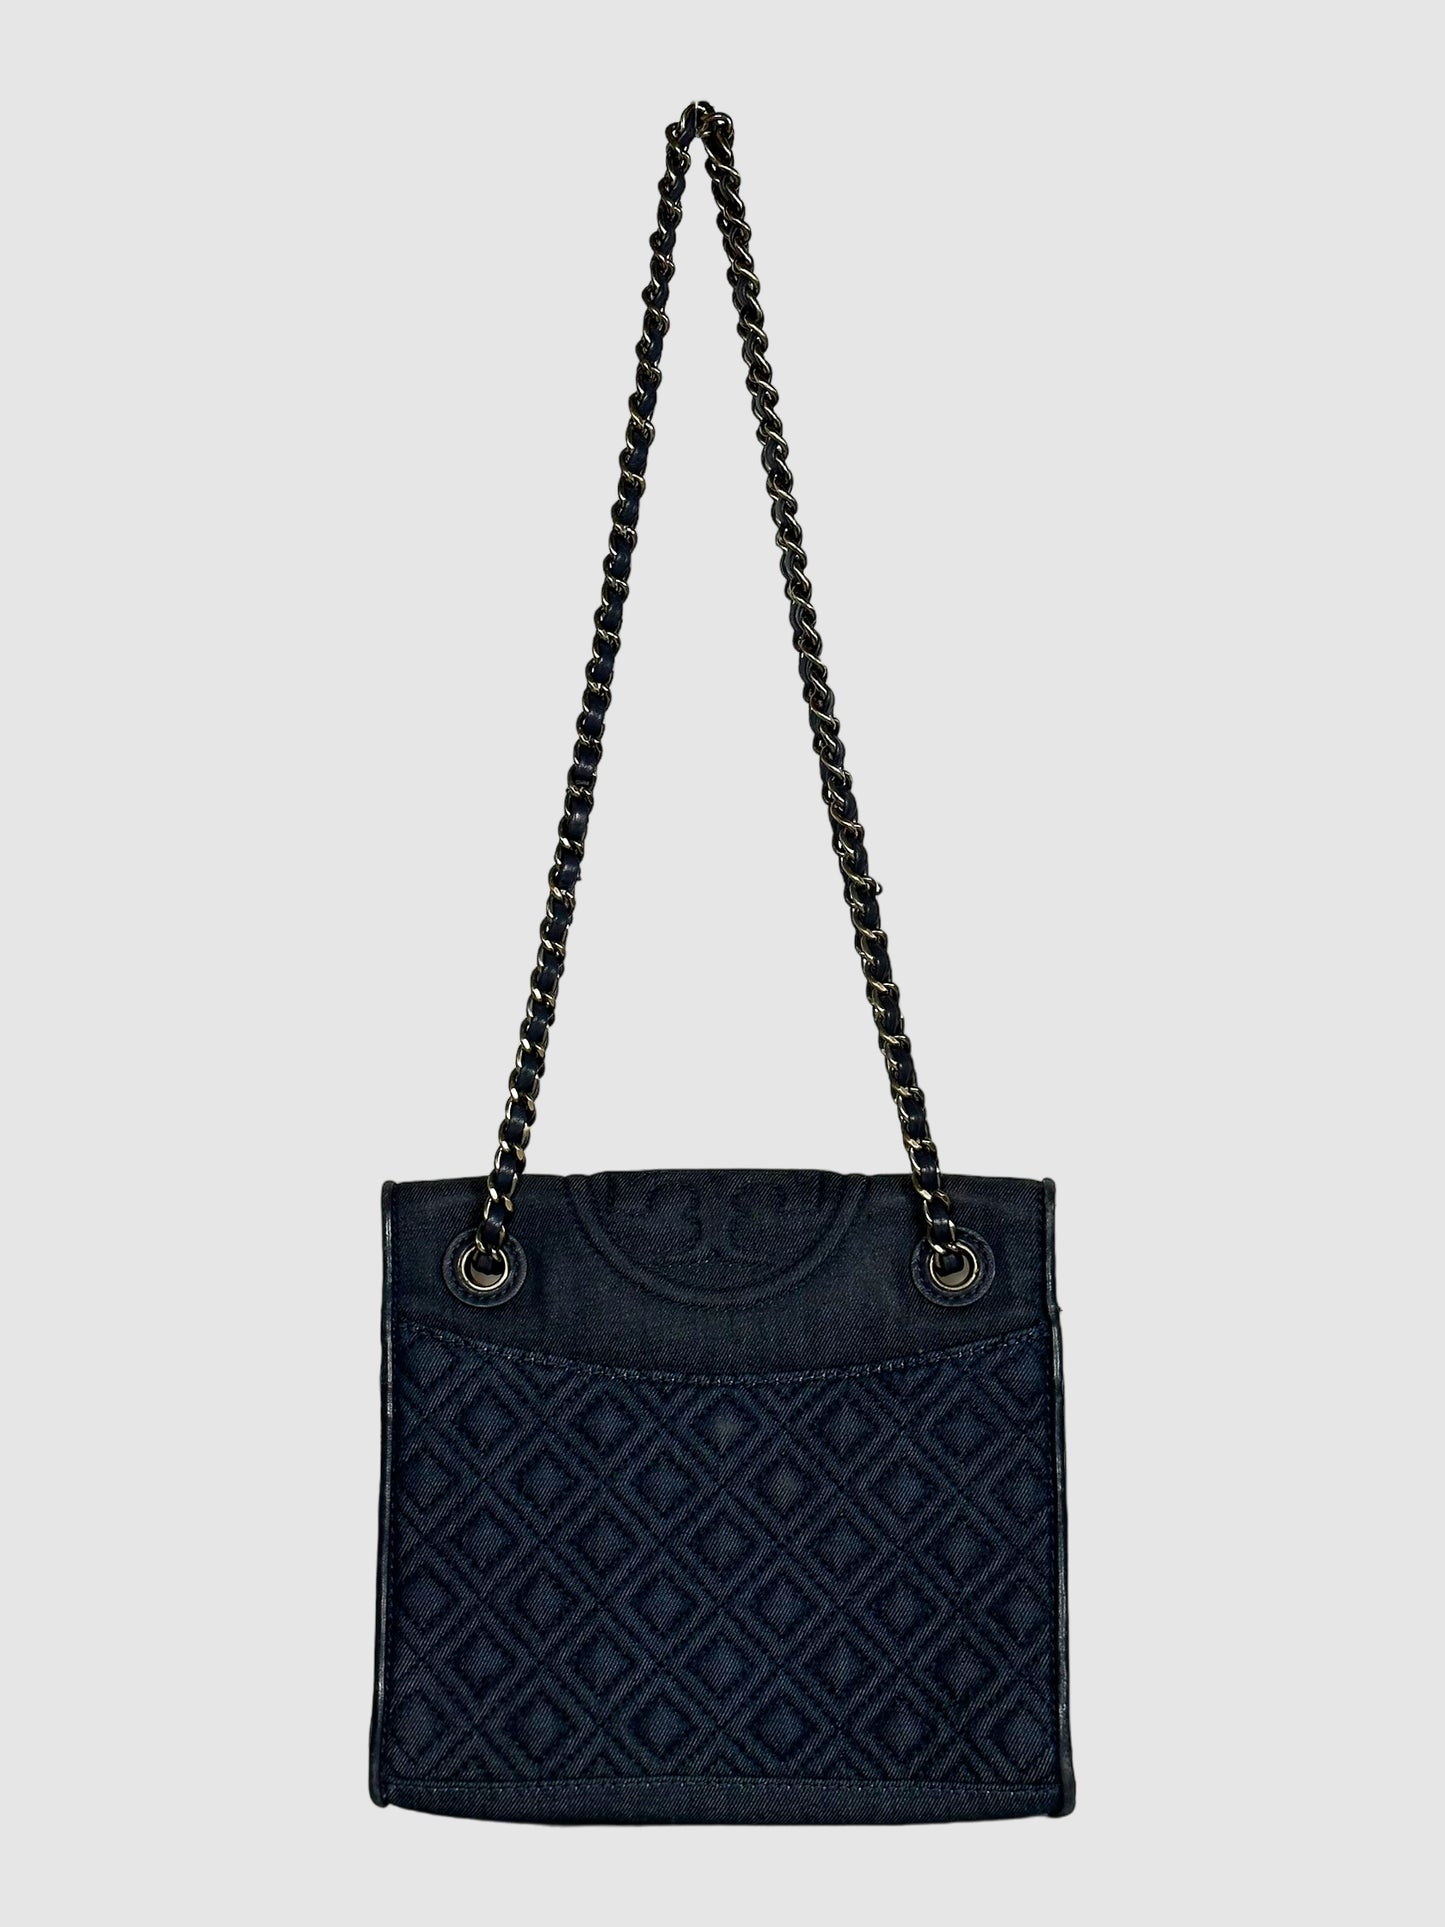 Tory Burch Denim Quilted Chain Bag